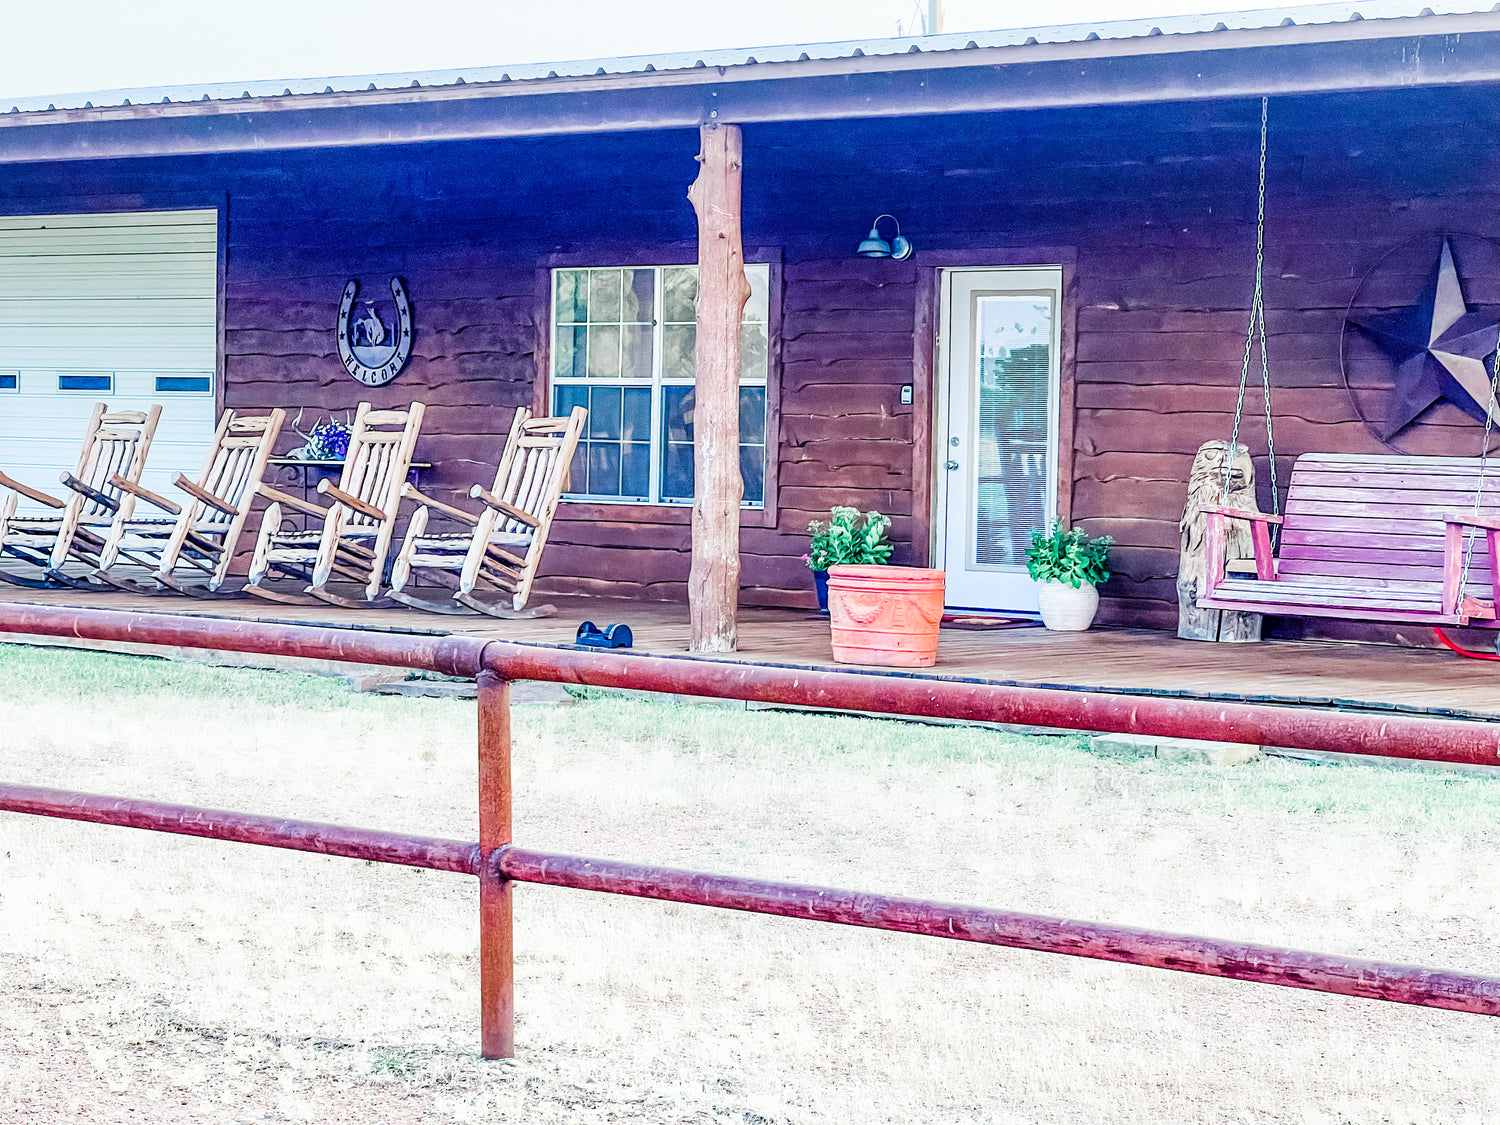 Stay with us at The Reagan Cabin. Retreat to the serene countryside for a relaxing outdoor getaway with your family or friends. The Reagan Cabin features an adventure for everyone. Located on 1200 acres of the family-owned cattle Ranch.